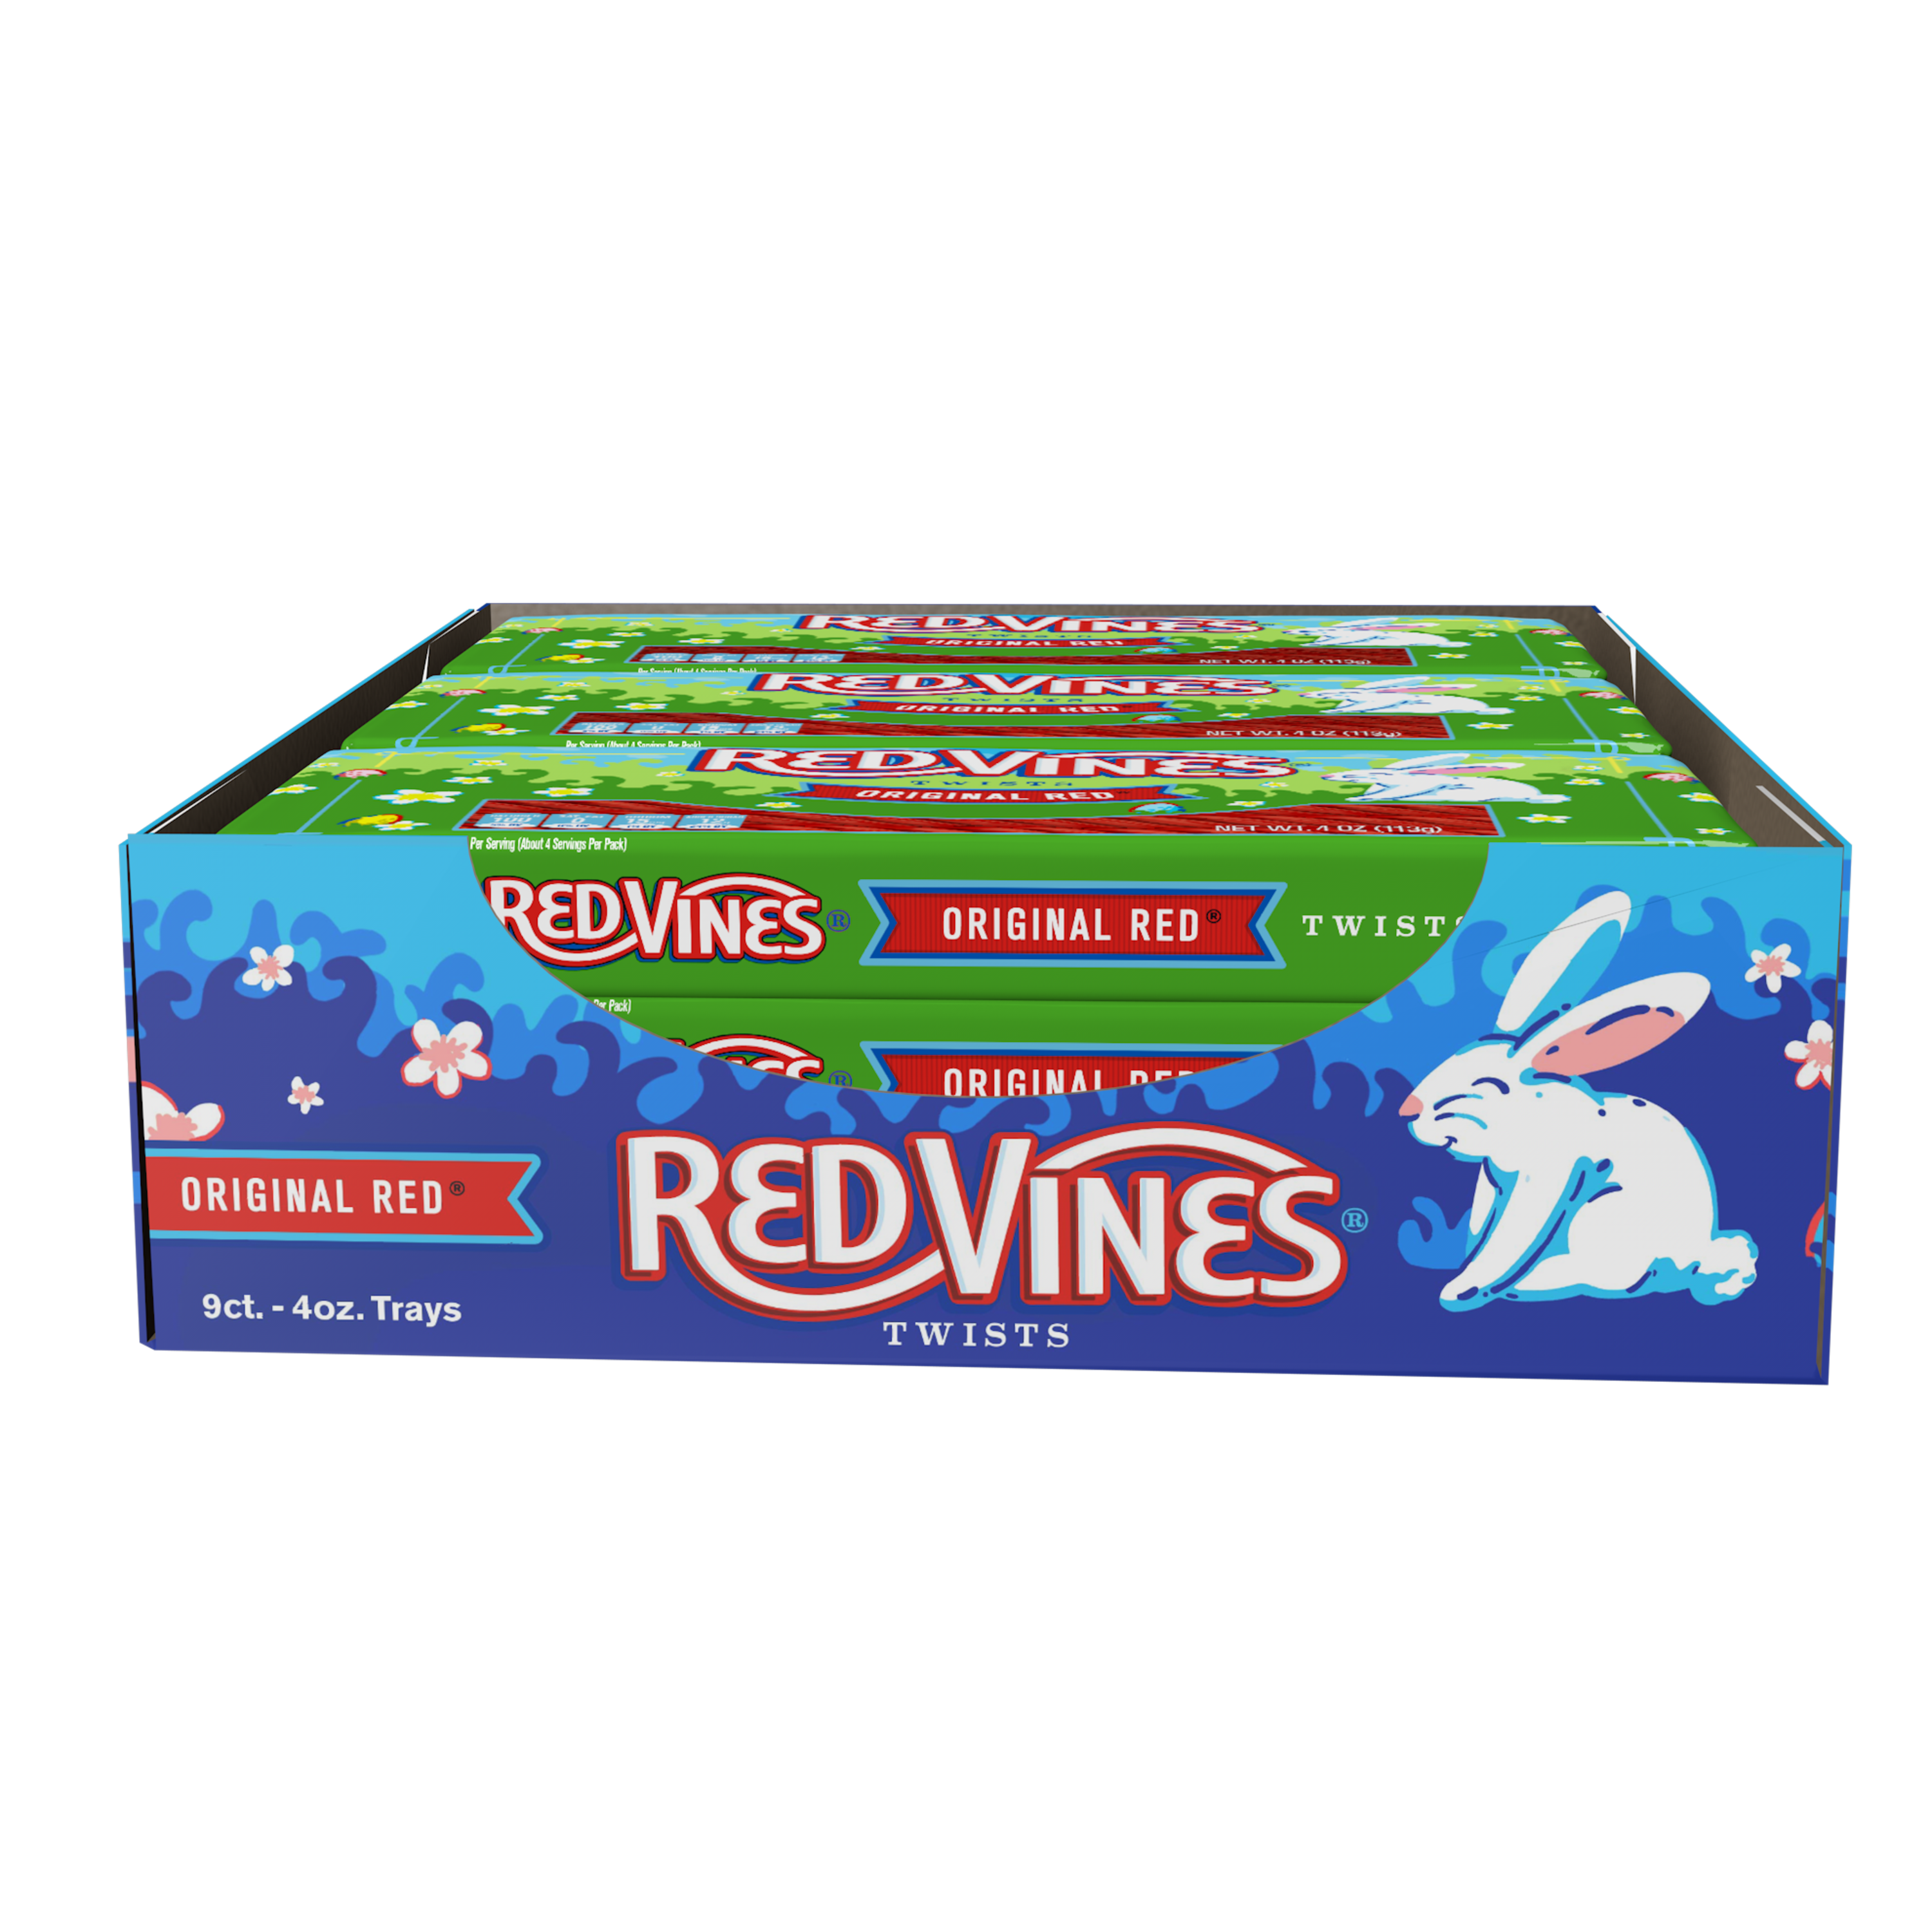 36 count box of RED VINES Easter Candy 4oz Trays